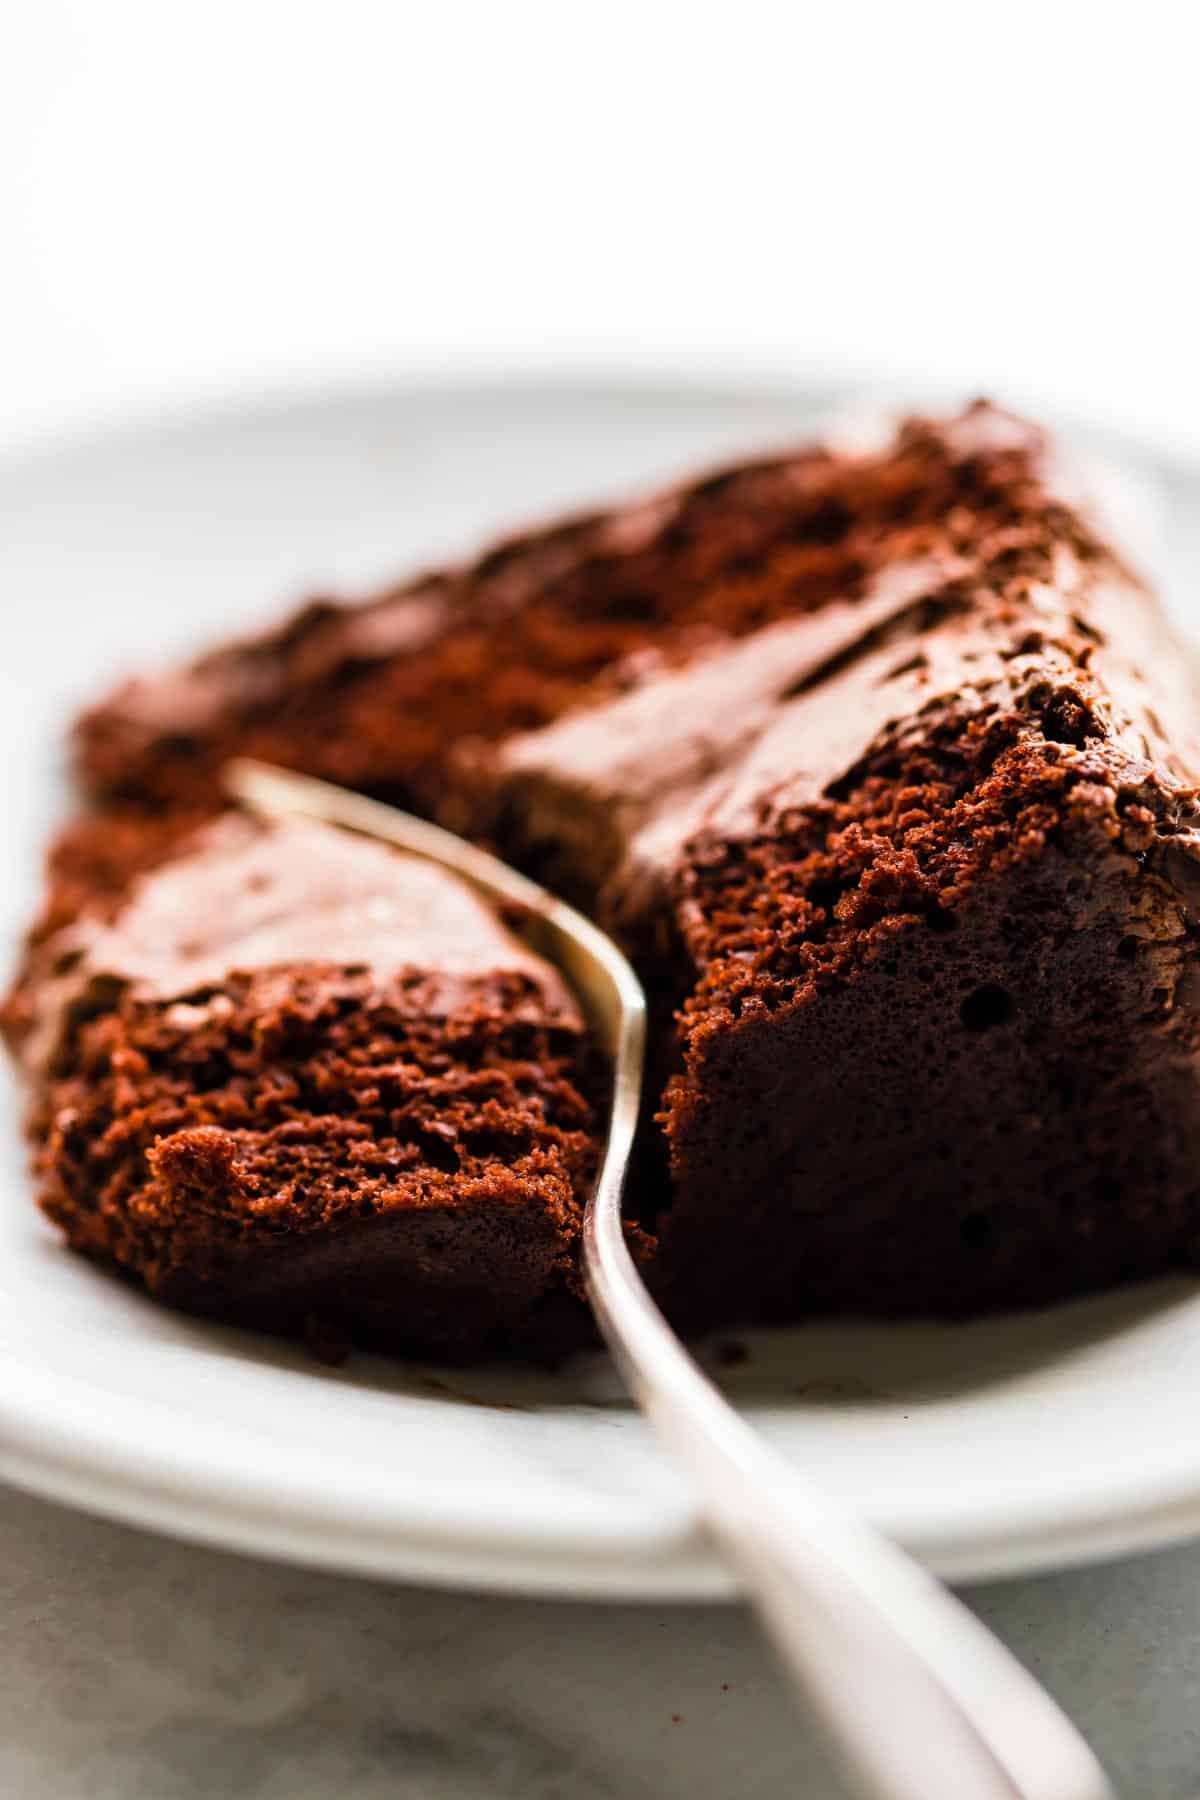 Close up image of a fork breaking into a slice of layered gluten free chocolate cake on a plate.